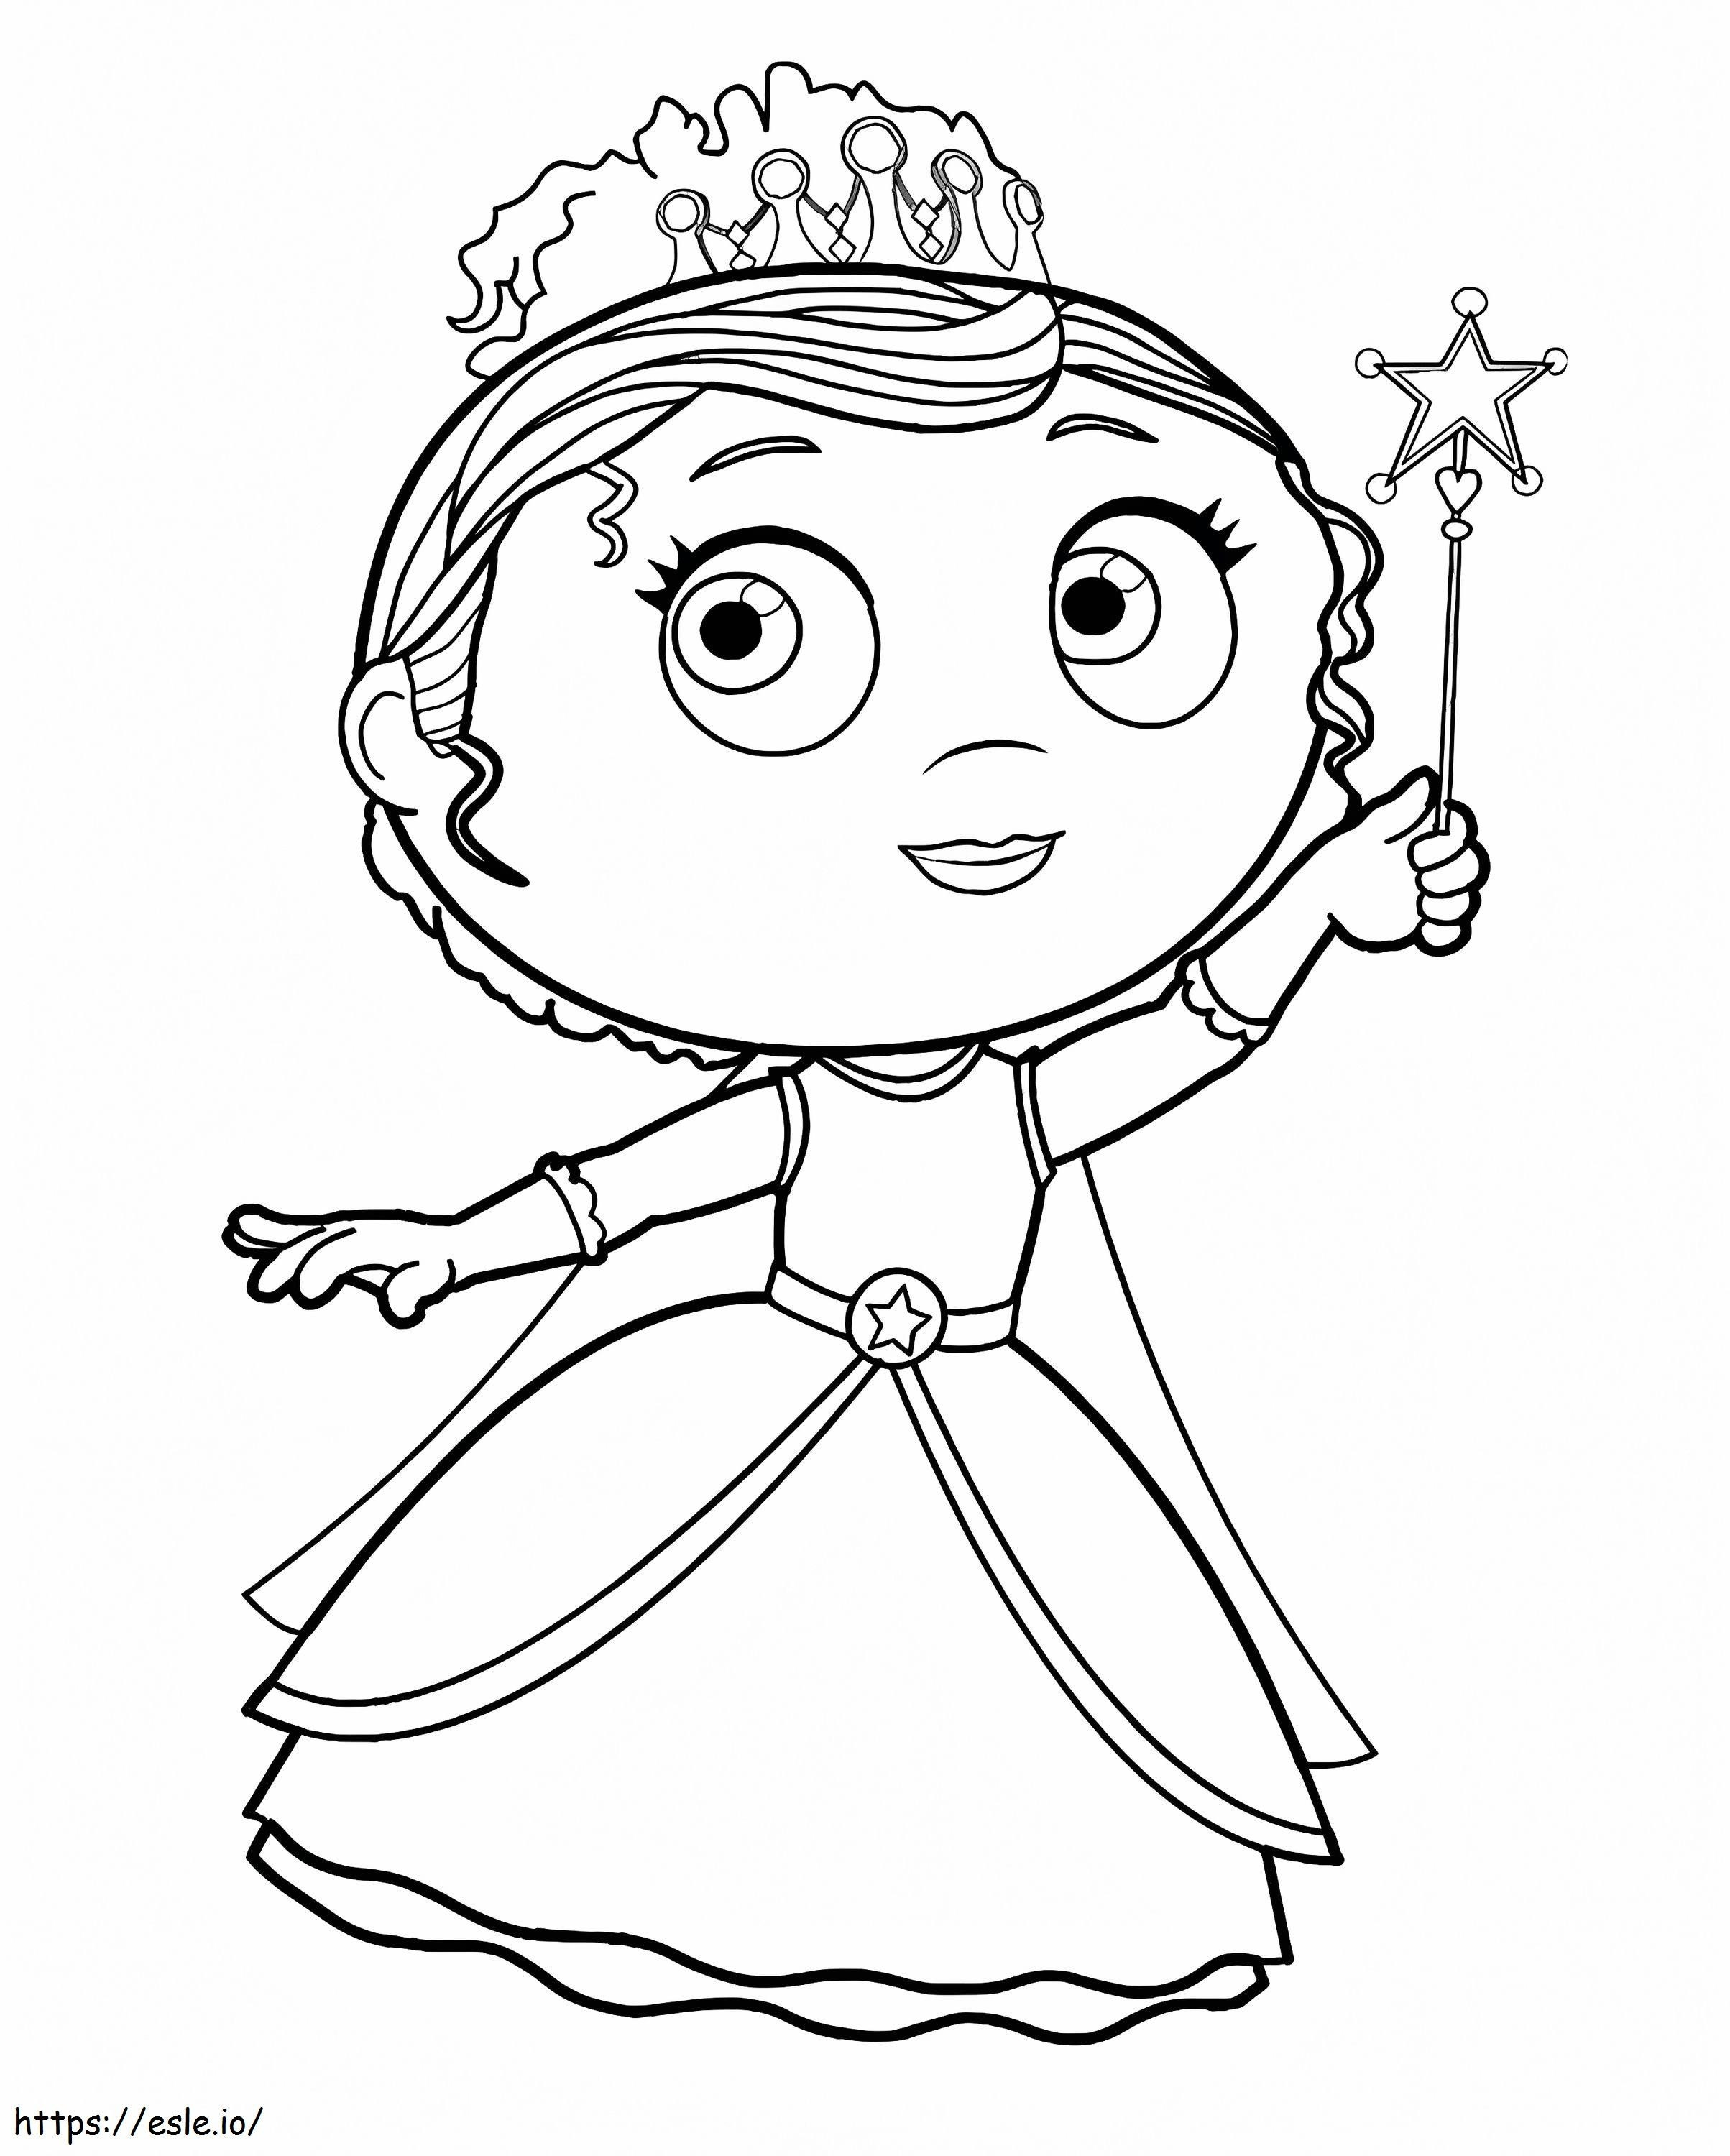 1581042800 Top 10 Super Why For Your Toddler coloring page